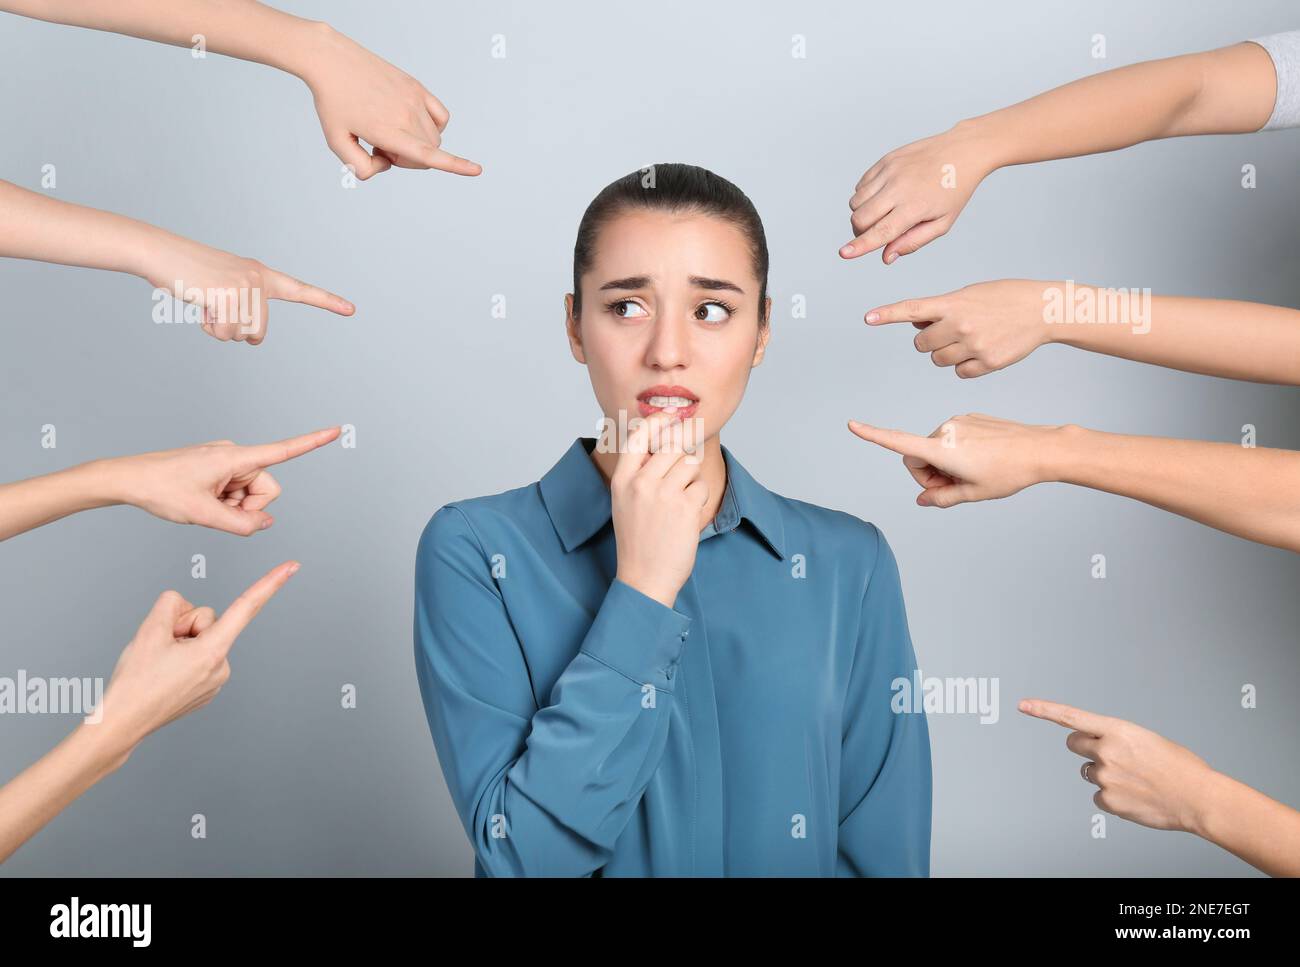 People pointing on emotional businesswoman against light grey background. Corporate social responsibility concept Stock Photo